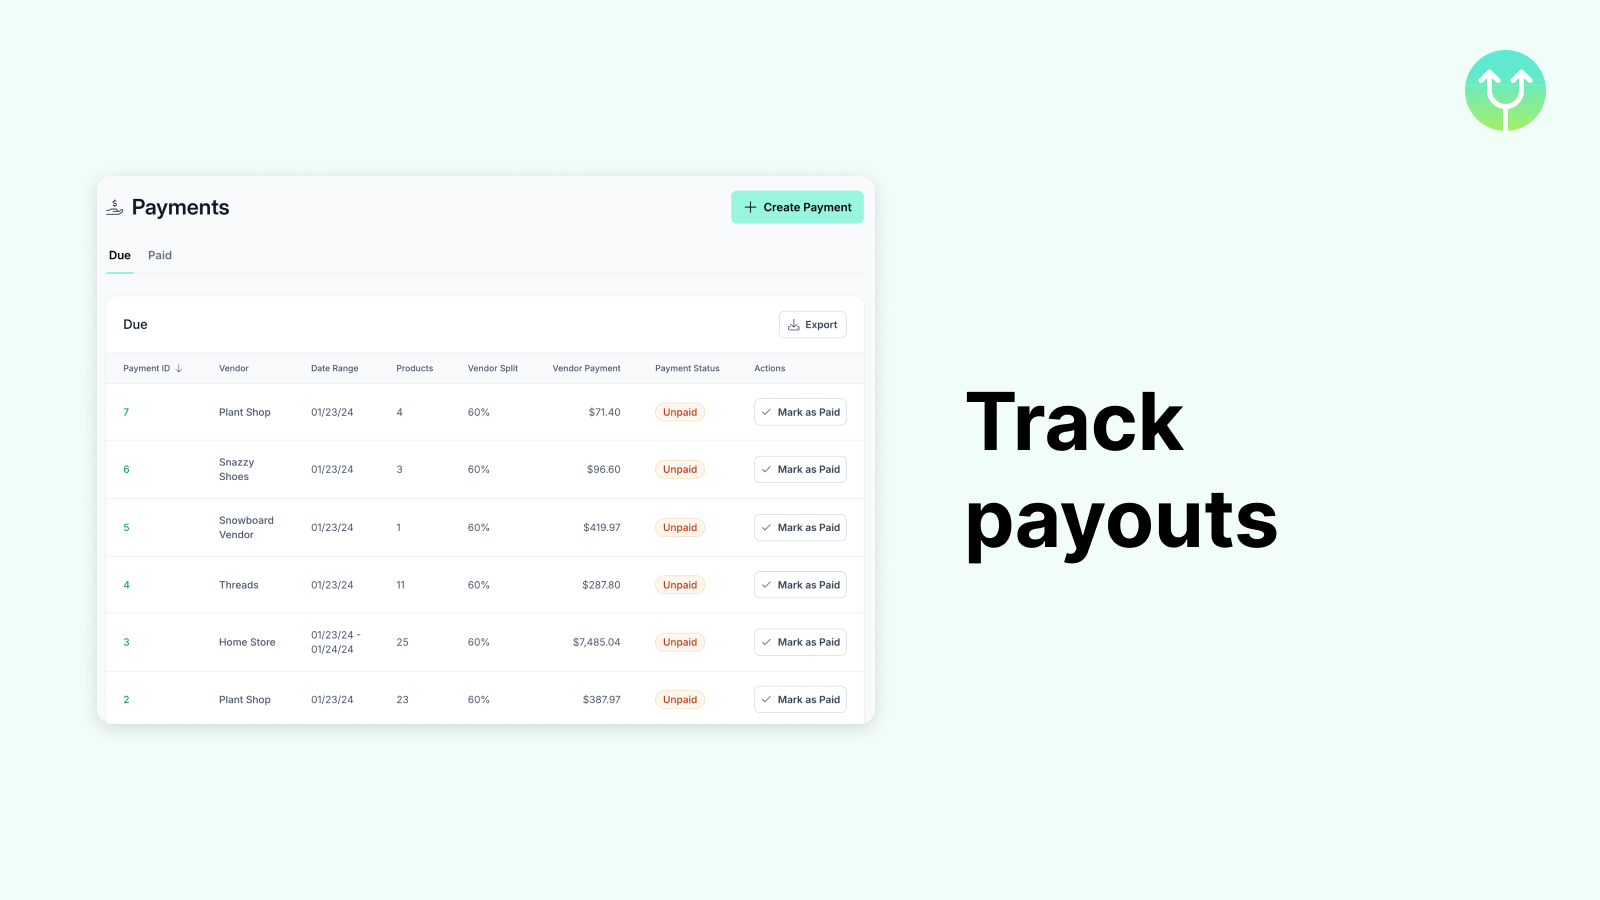 Track payouts with ConsignMint's payment history and automations